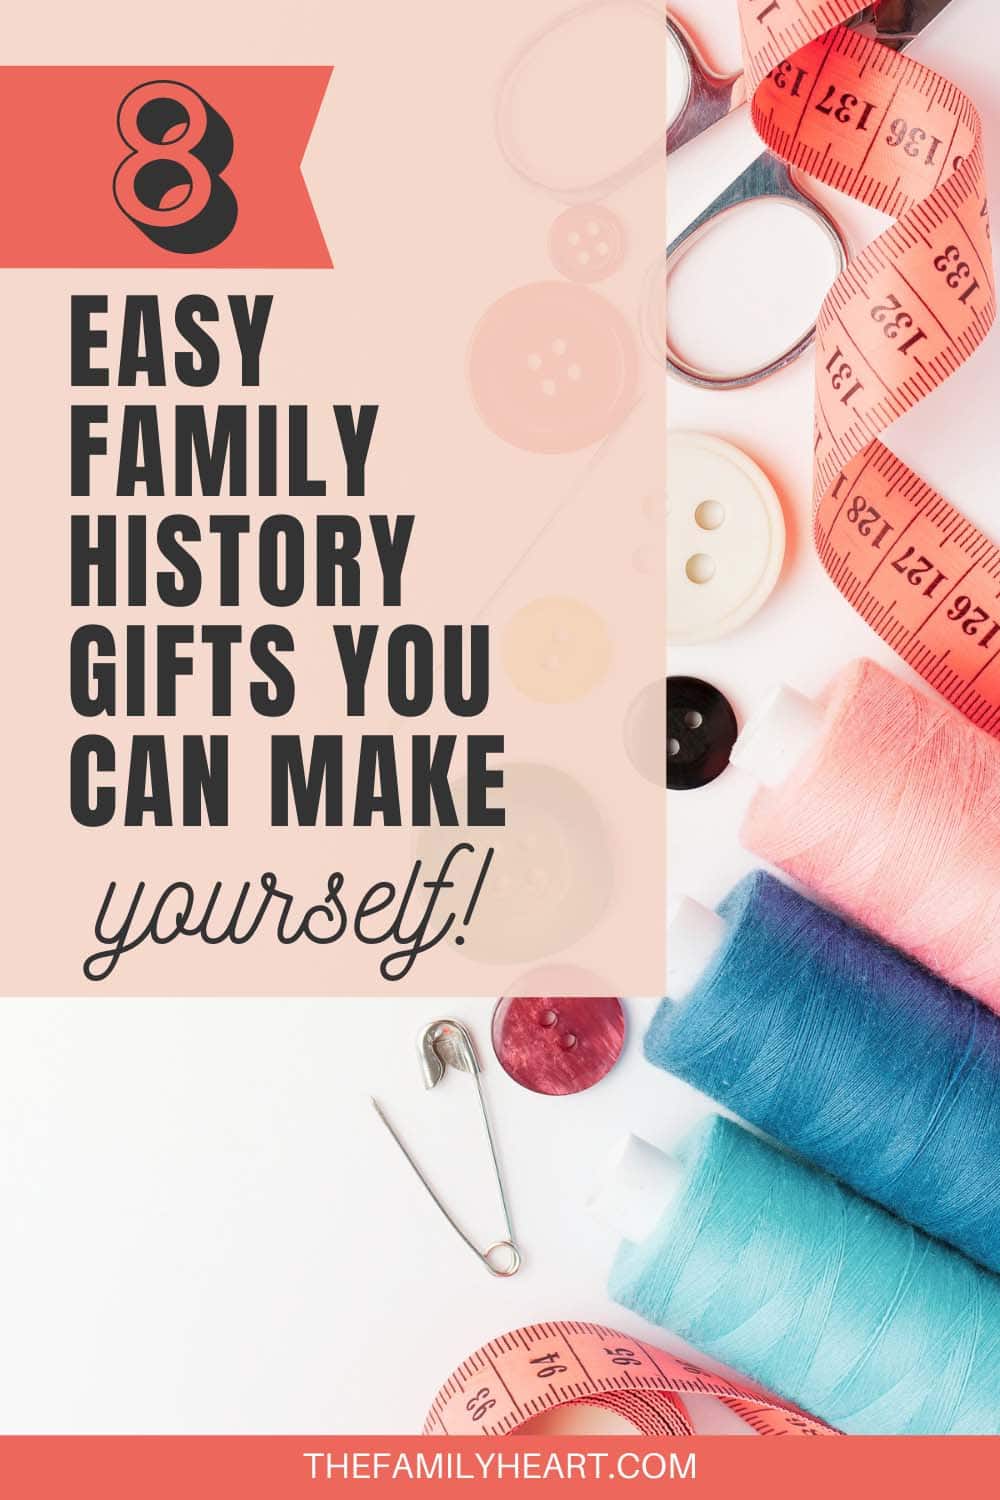 8 Easy Family History Gifts You Can Make Yourself - Heart of the Family™